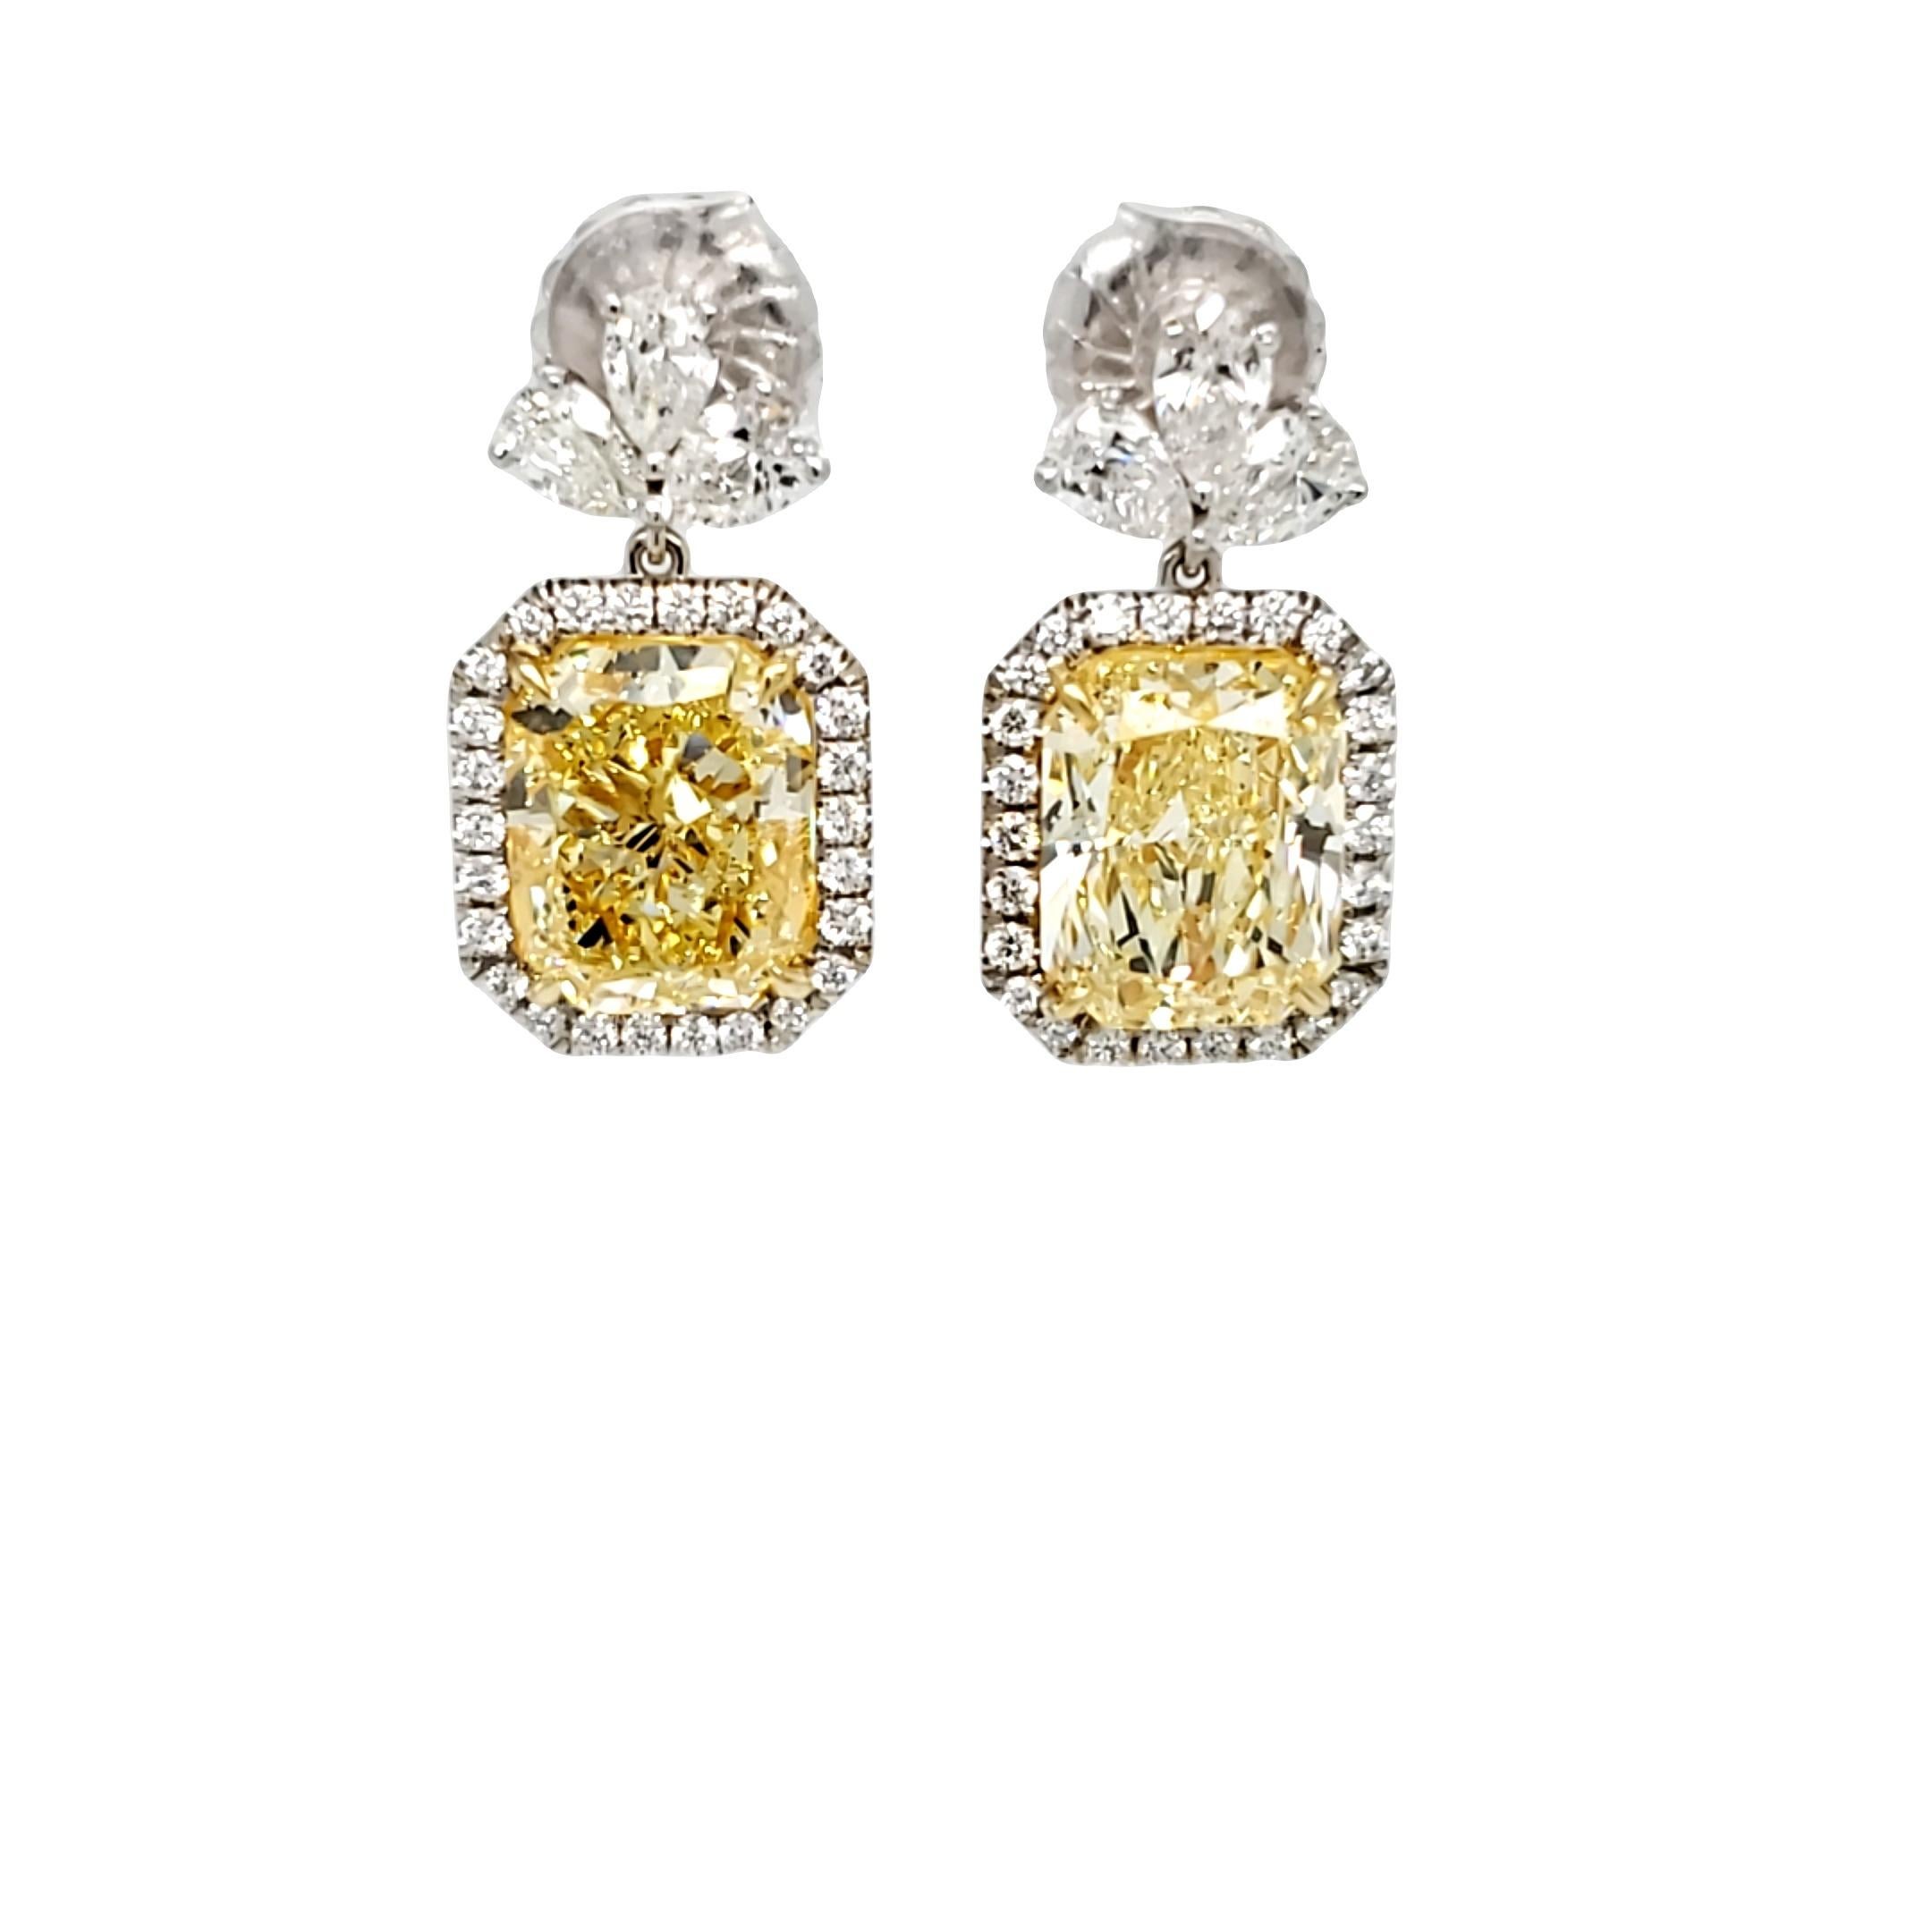 A beautifully matched 14.37tw Radiant Fancy Yellow VS1 - VS2 clarity diamond earrings are GIA Certified. These gorgeous light weight drop earrings set in 18k white and yellow gold also features a matched pair of white pear shapes with an elegant